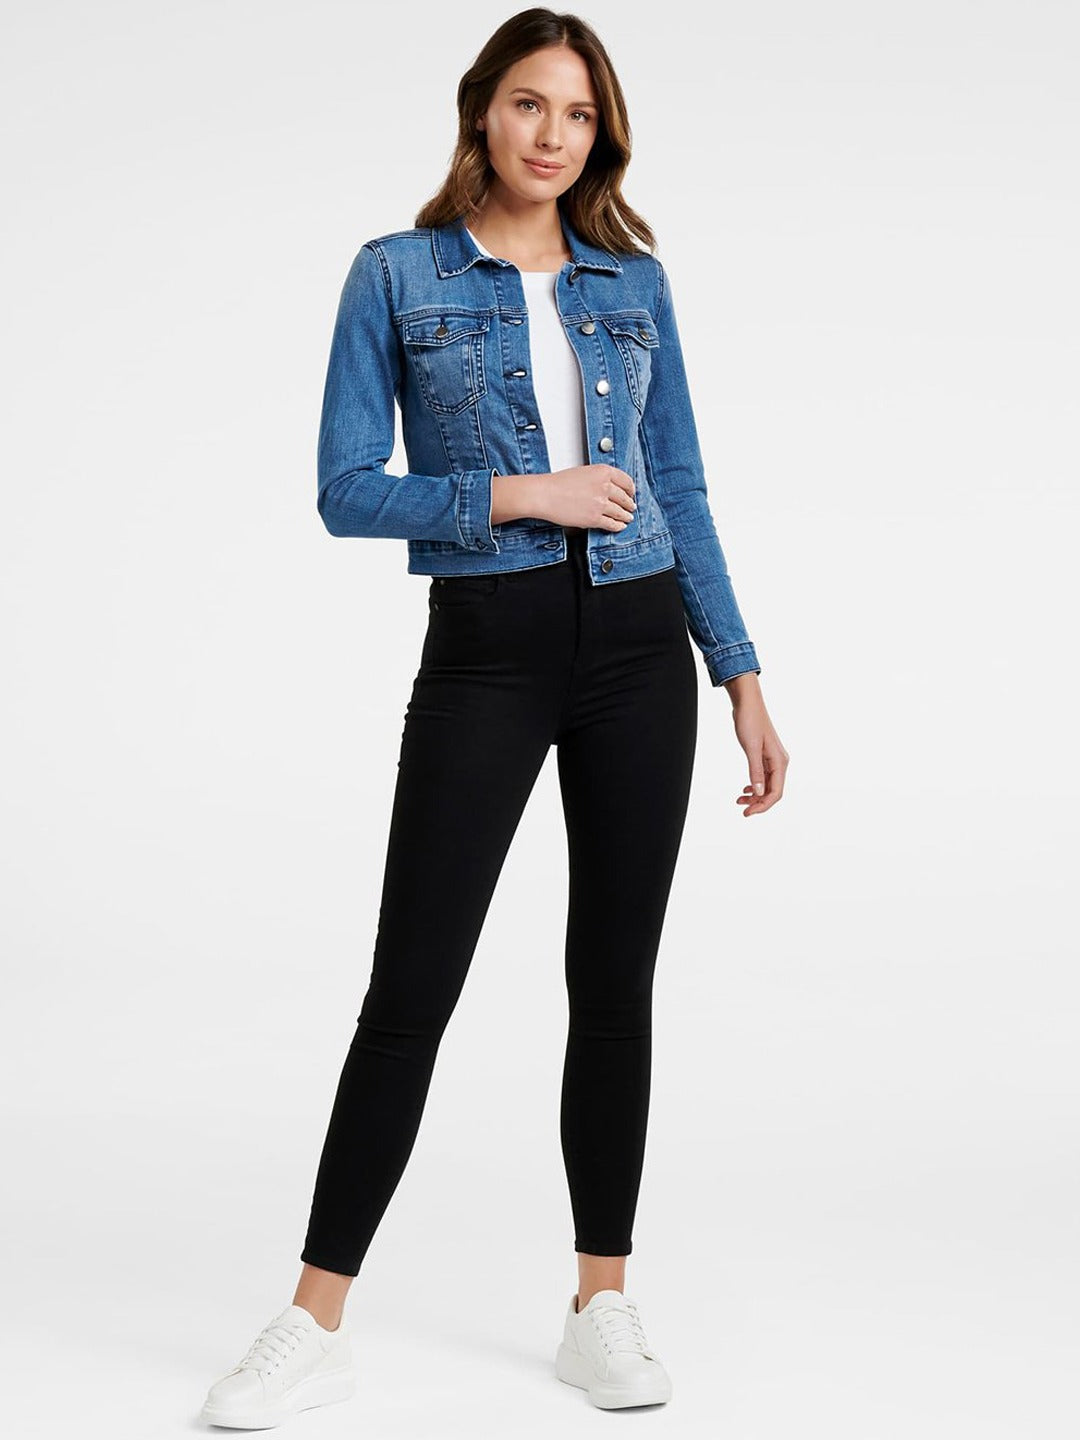 Women's blue denim jacket with front pockets, worn over black skinny jeans and paired with white sneakers.